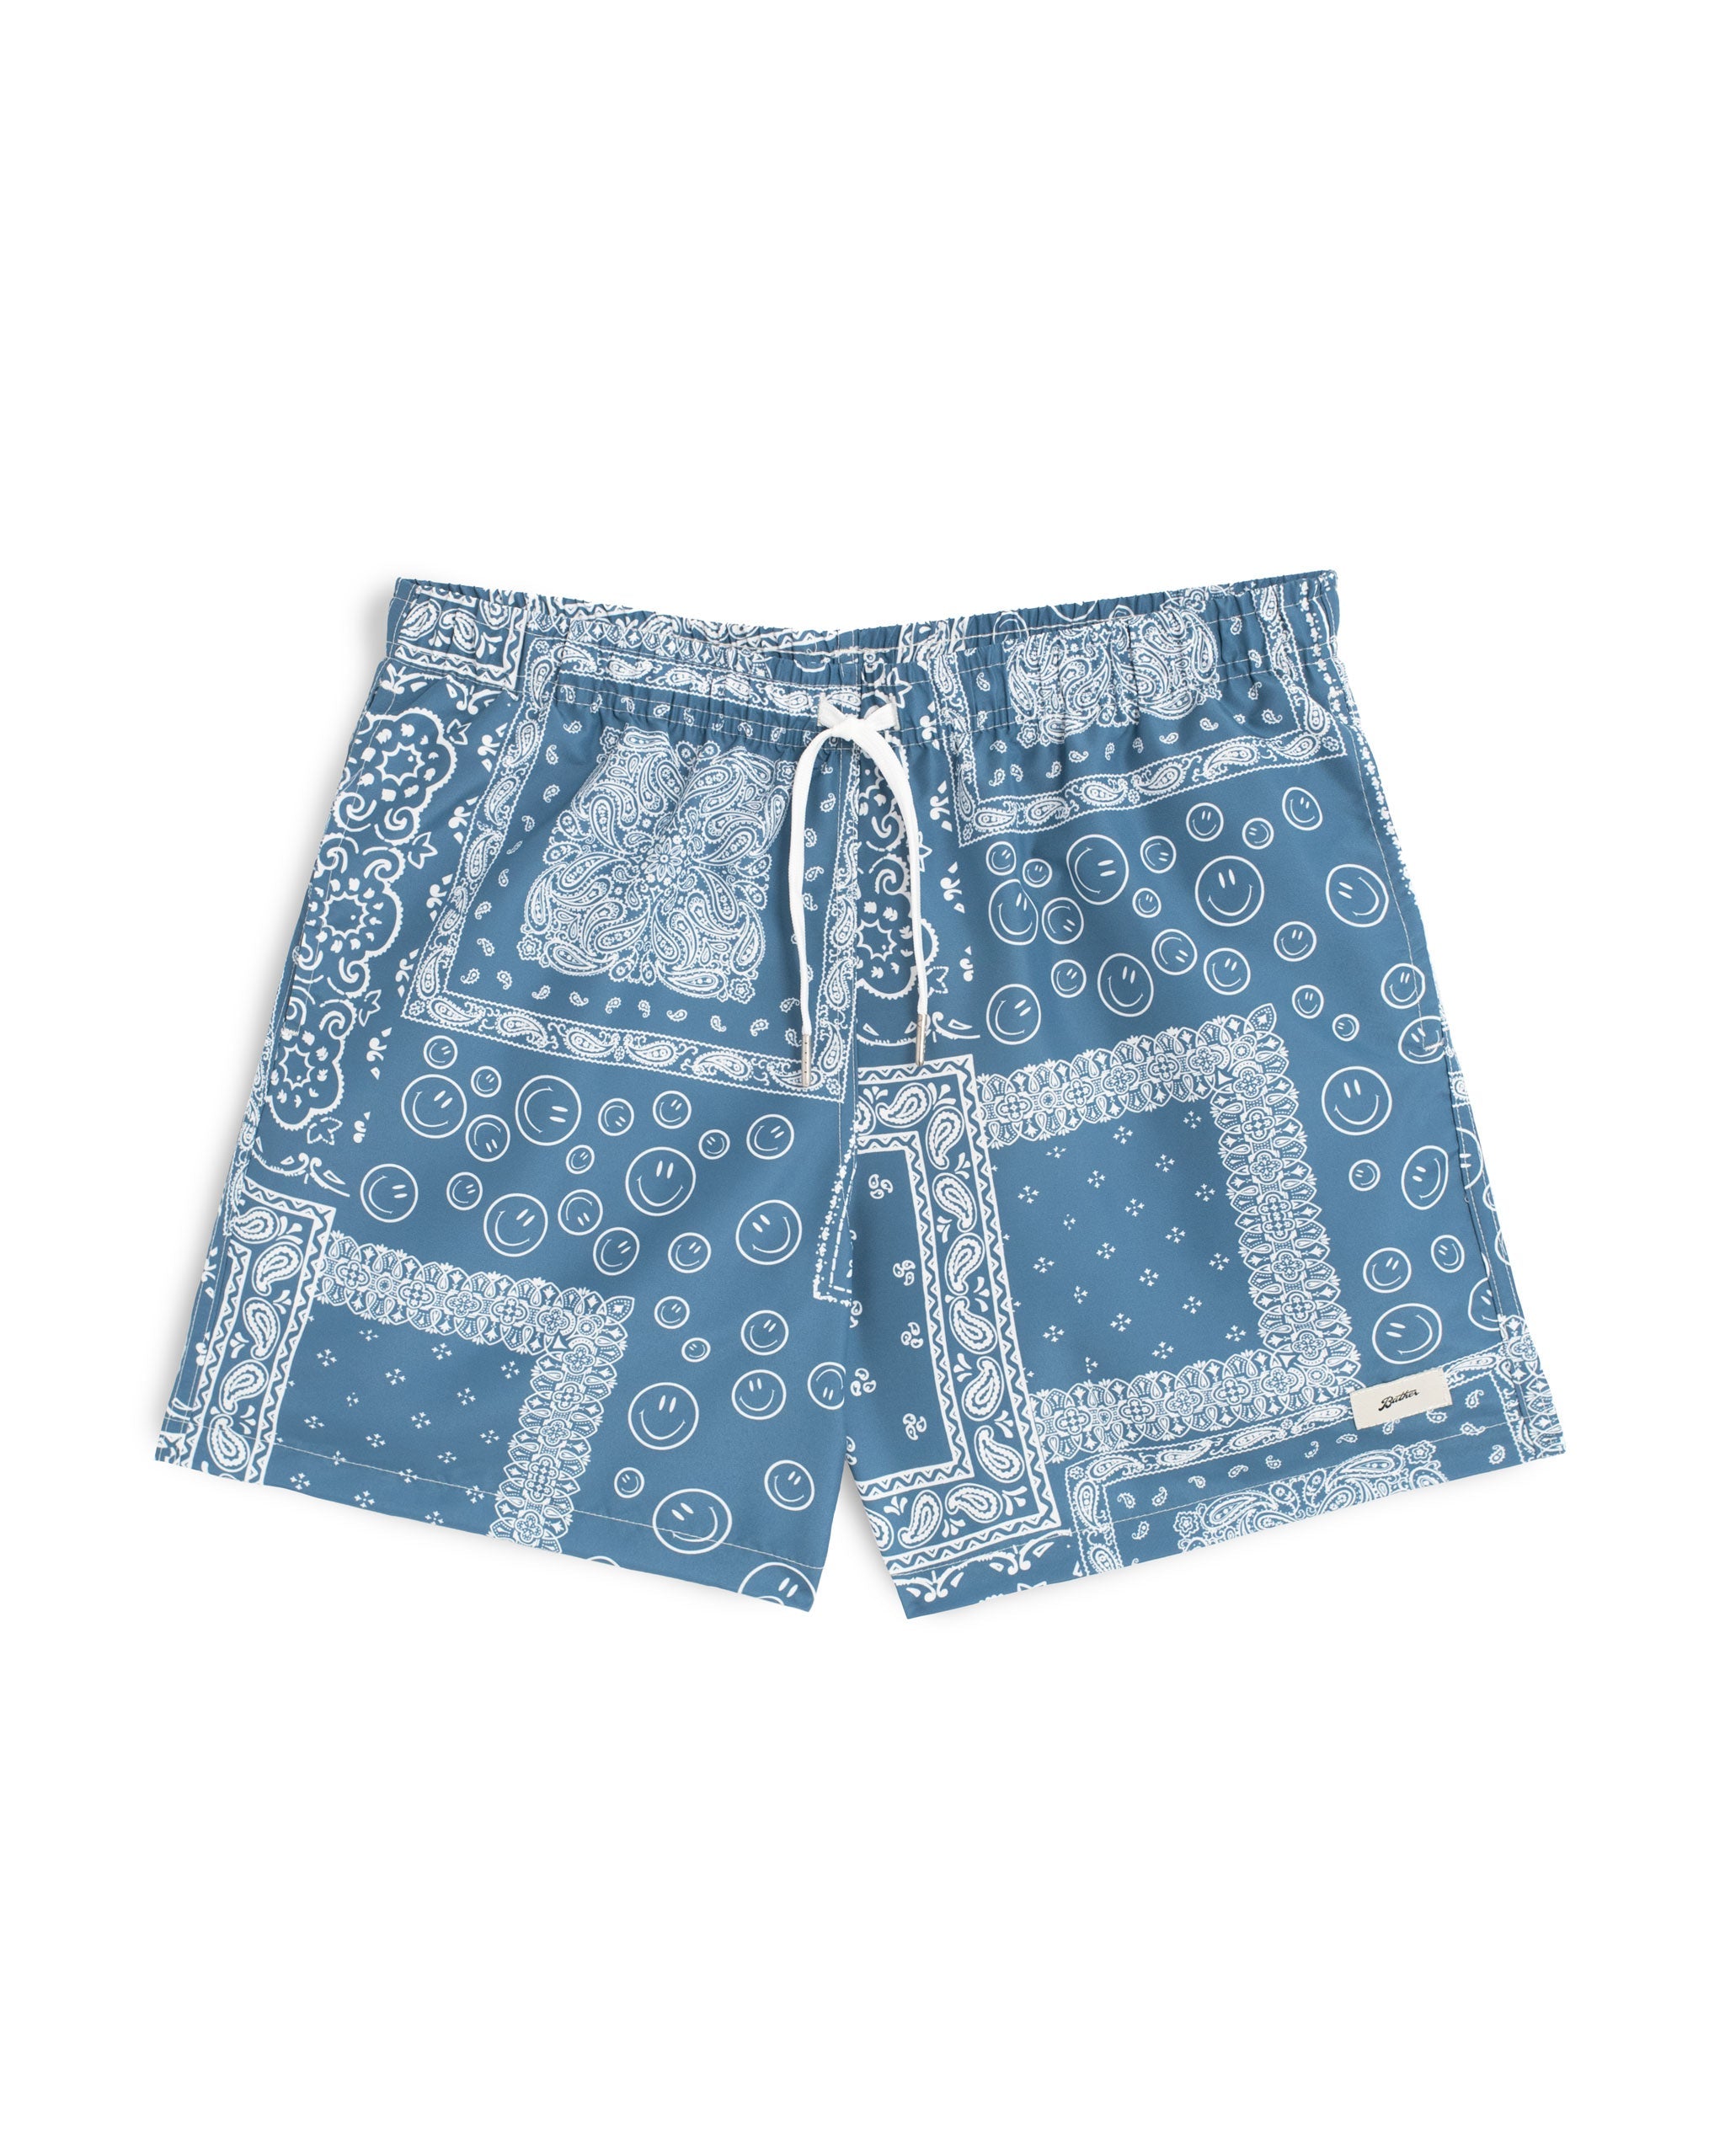 Blue swim trunk with all-over bandana print